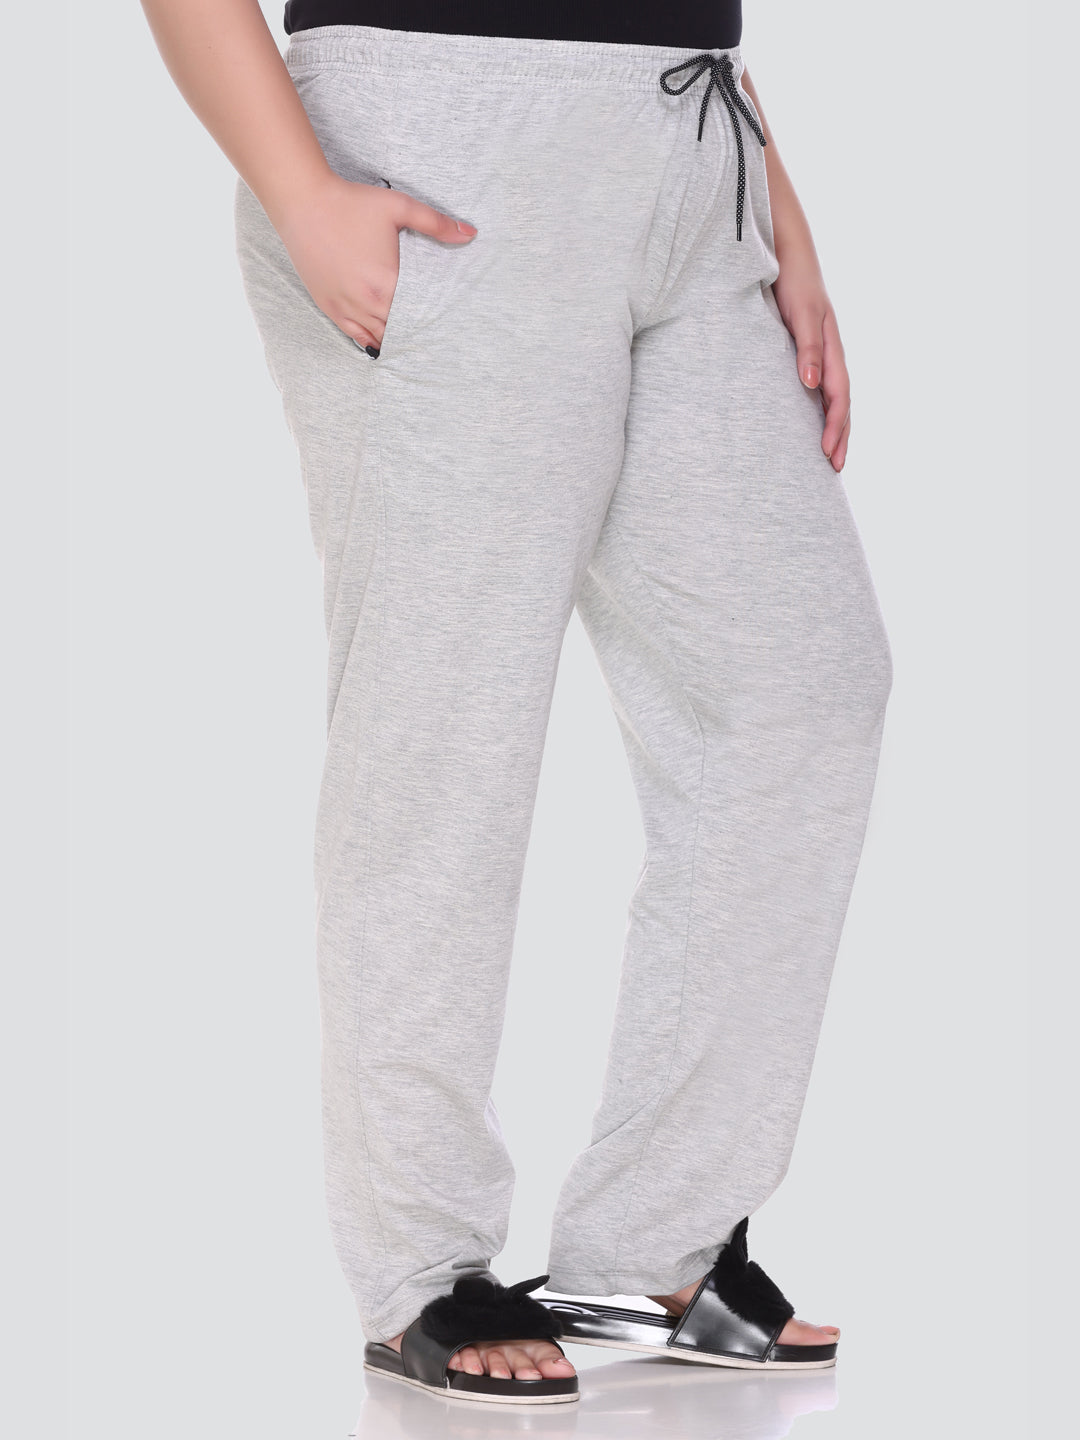 Comfy Grey Cotton Track Pants For Women At Best Prices